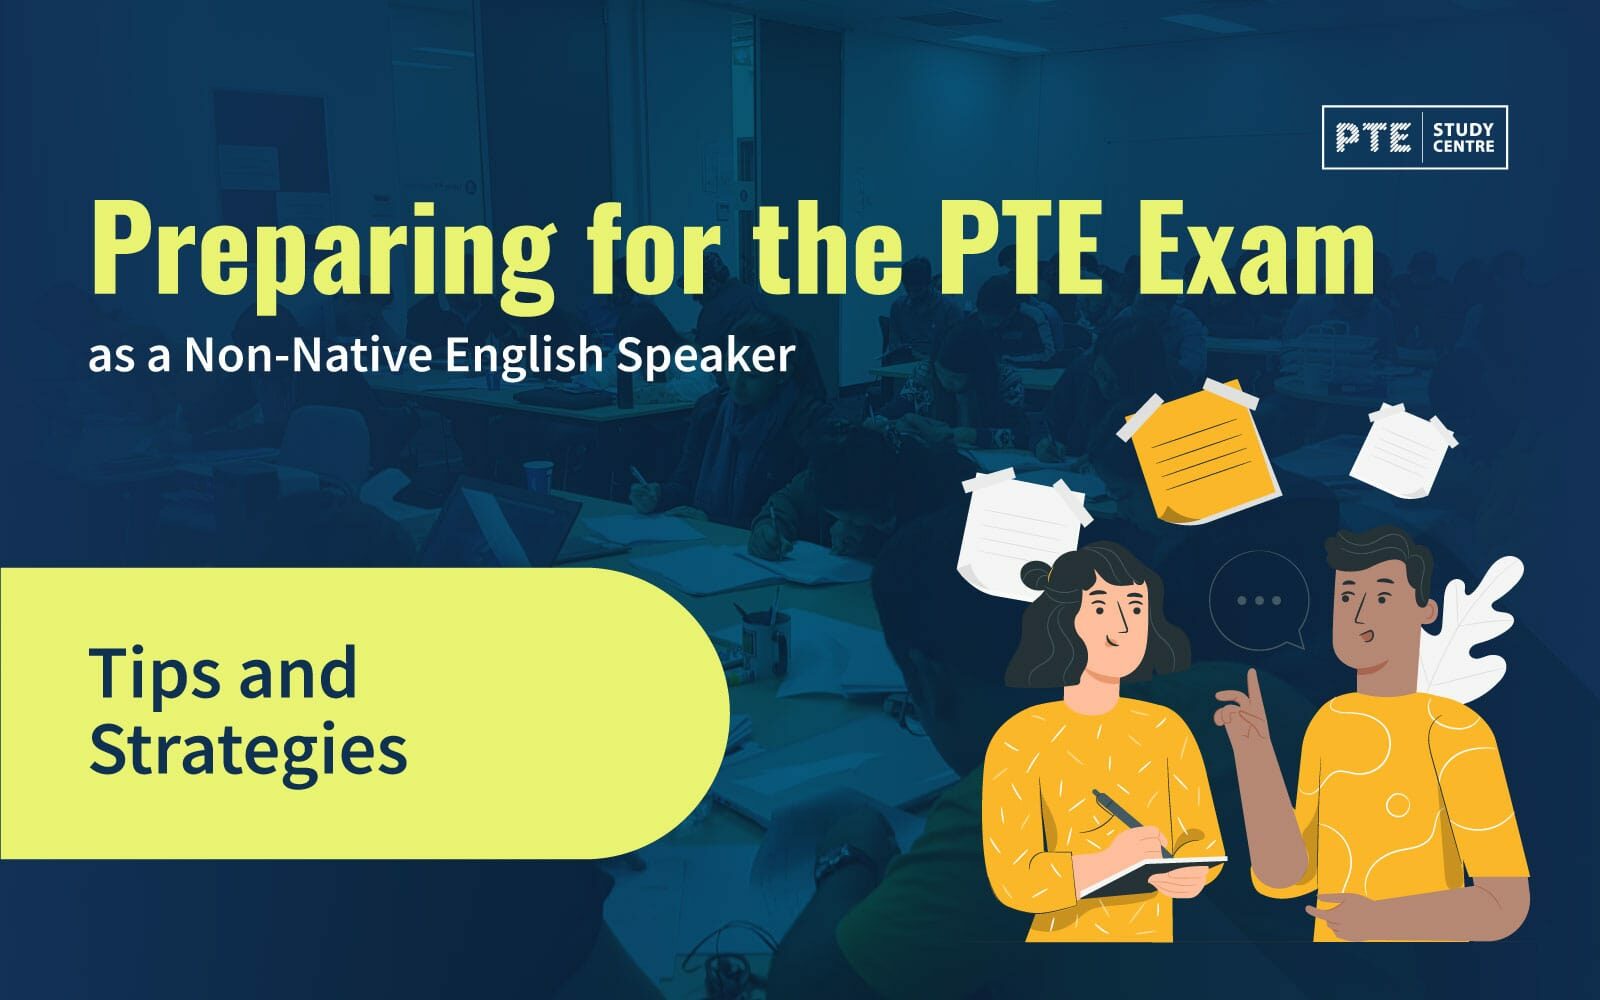 Preparing for the PTE Exam as a Non-Native English Speaker: Tips and Strategies